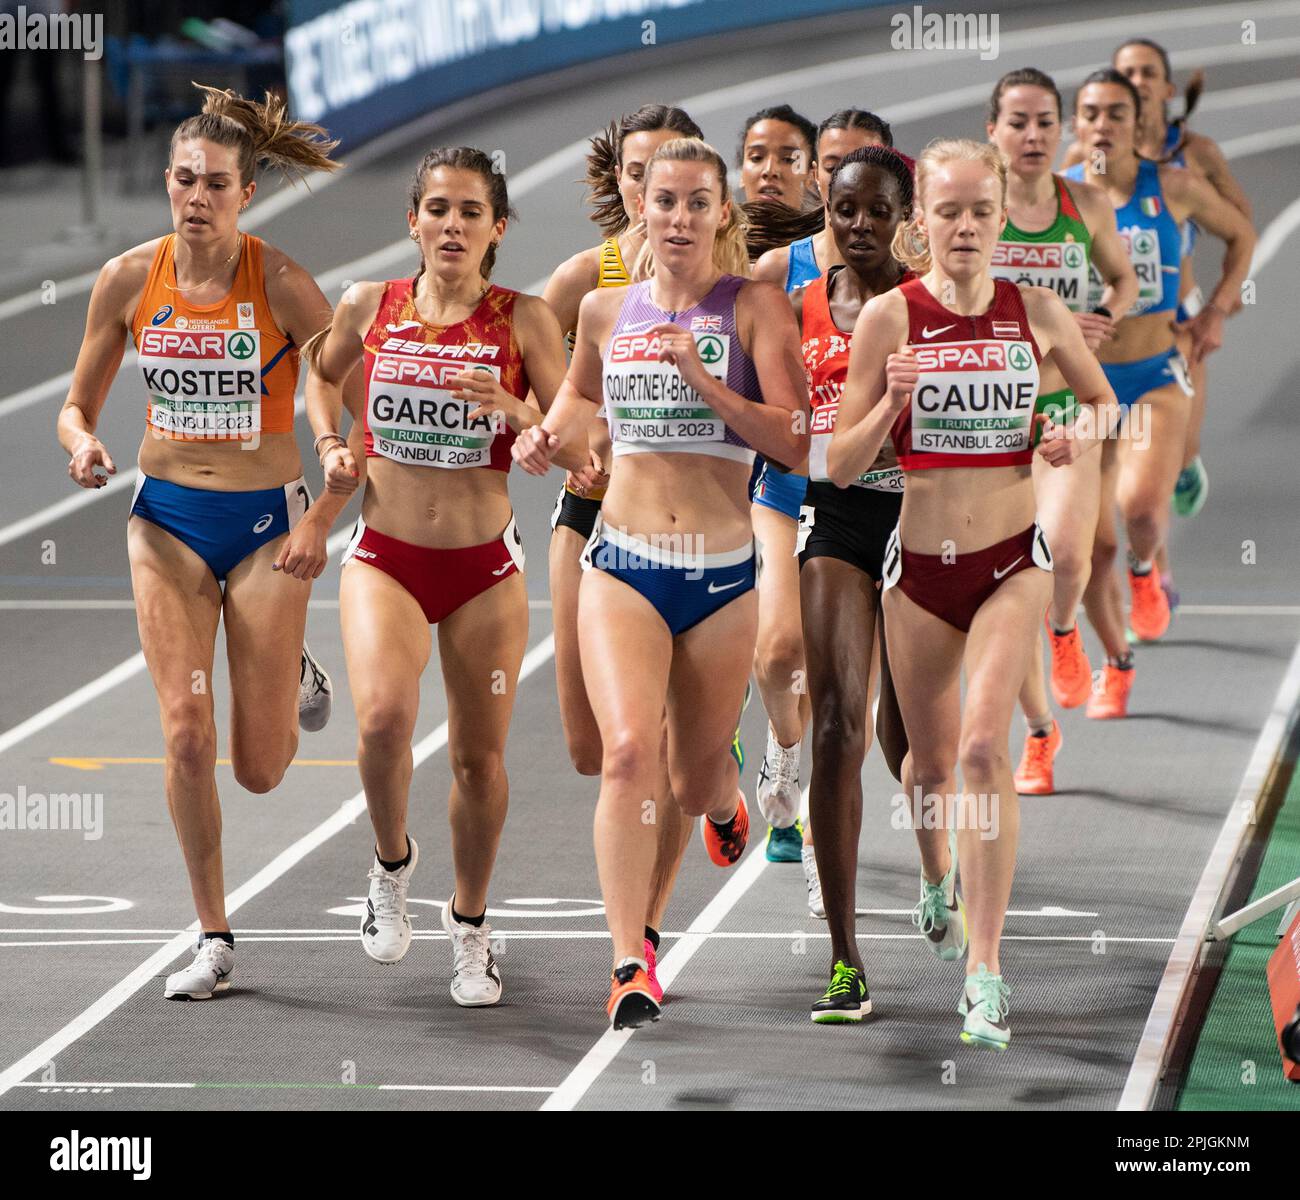 Agate Caune of Latvia competing in the women’s 3000m heats at the European Indoor Athletics Championships at Ataköy Athletics Arena in Istanbul, Türki Stock Photo